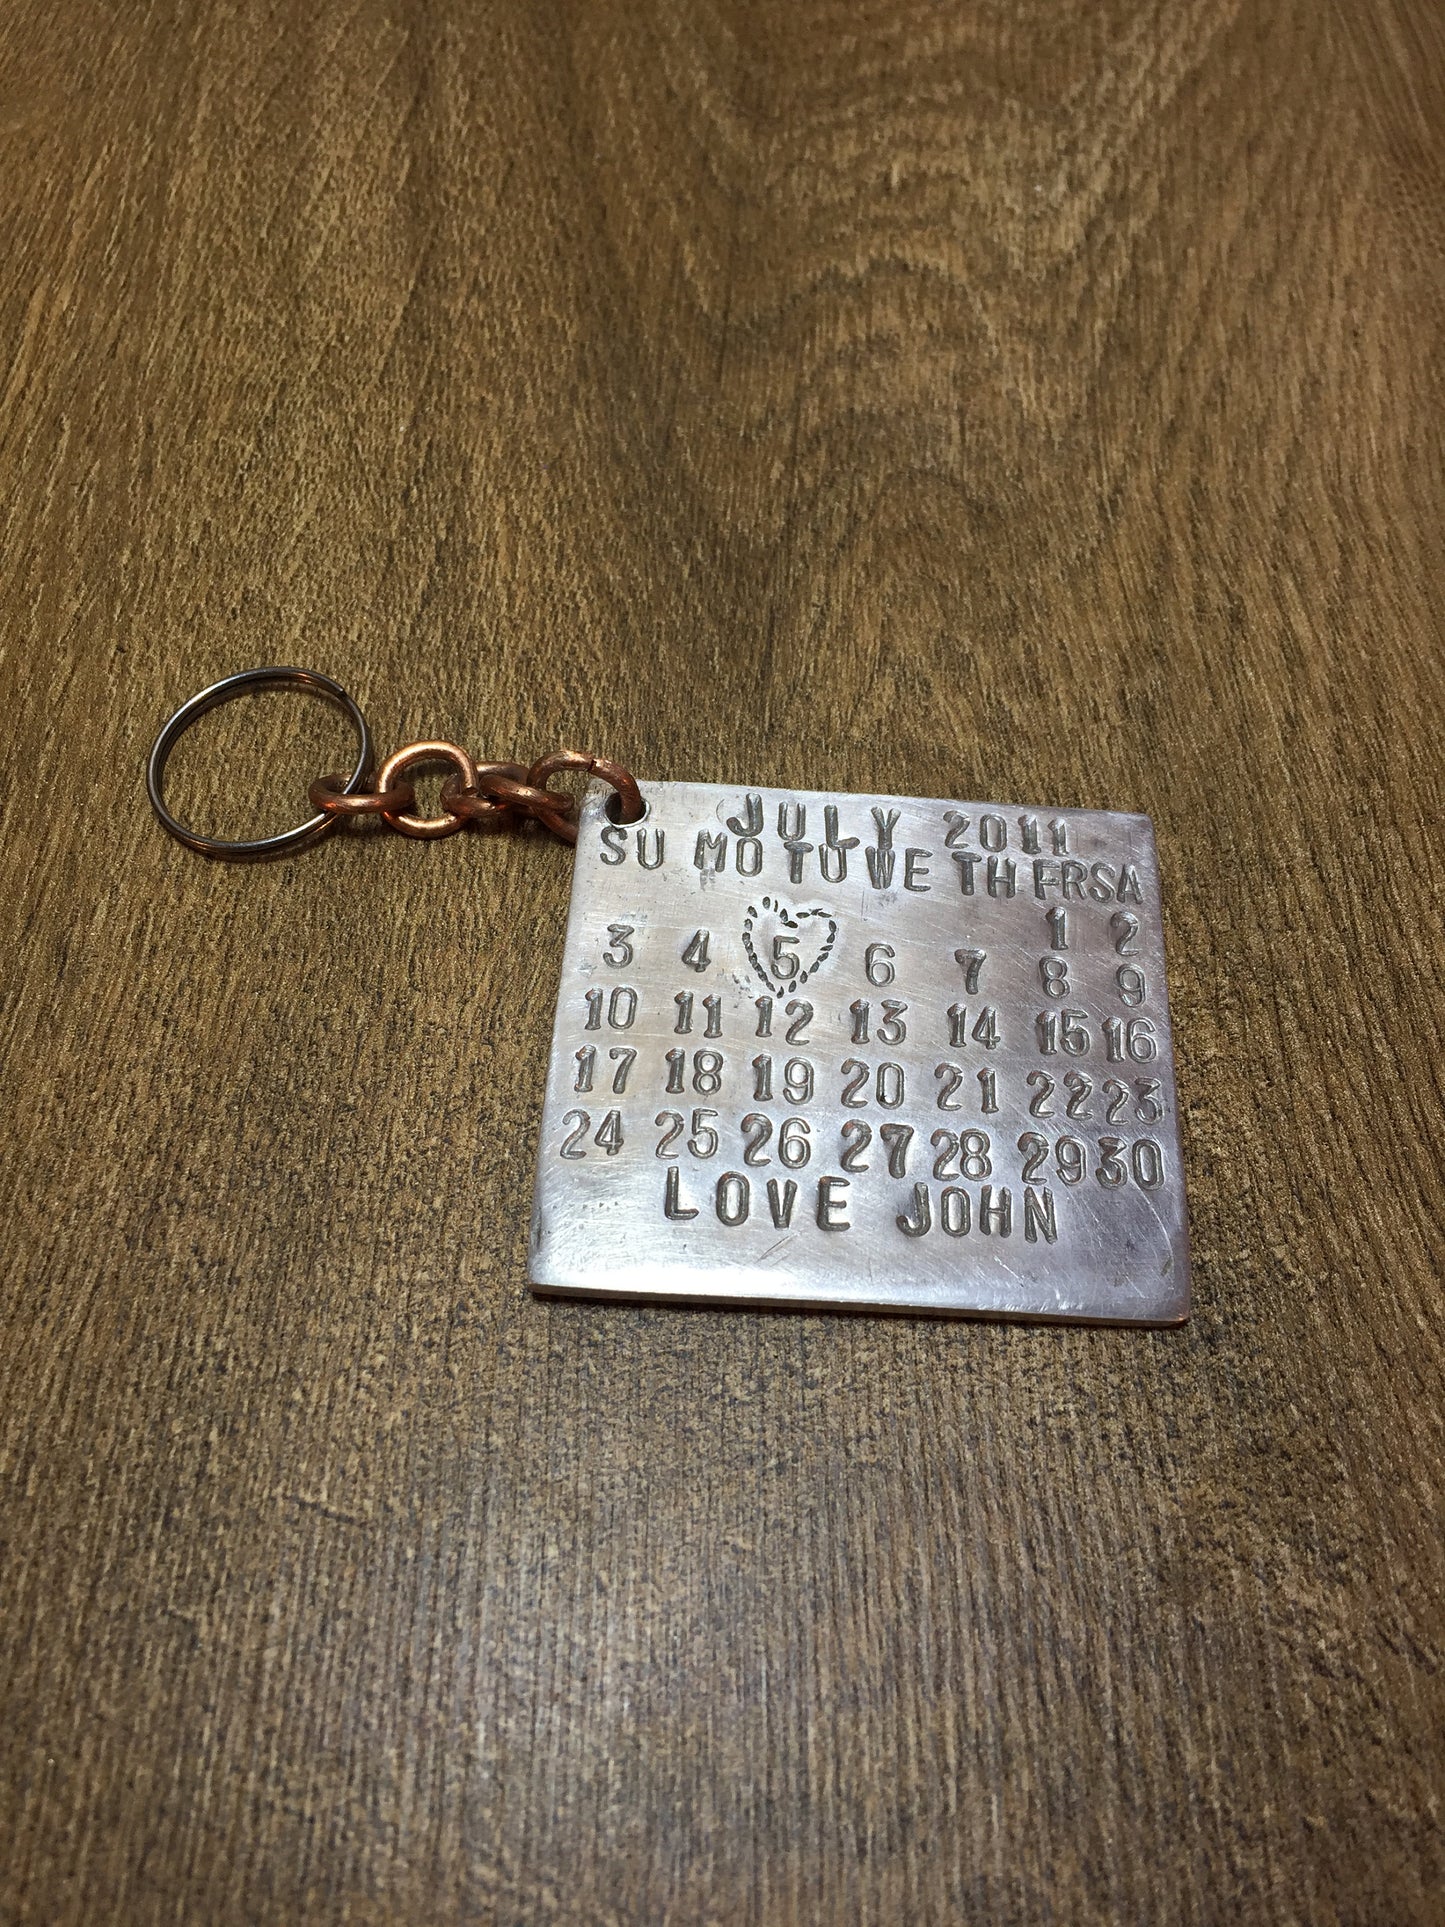 10 year anniversary, tin artwork, tin art, tin gift, gift for couple, husband gift, engraved,handstamped,wife gift,key chain,keyring,key fob